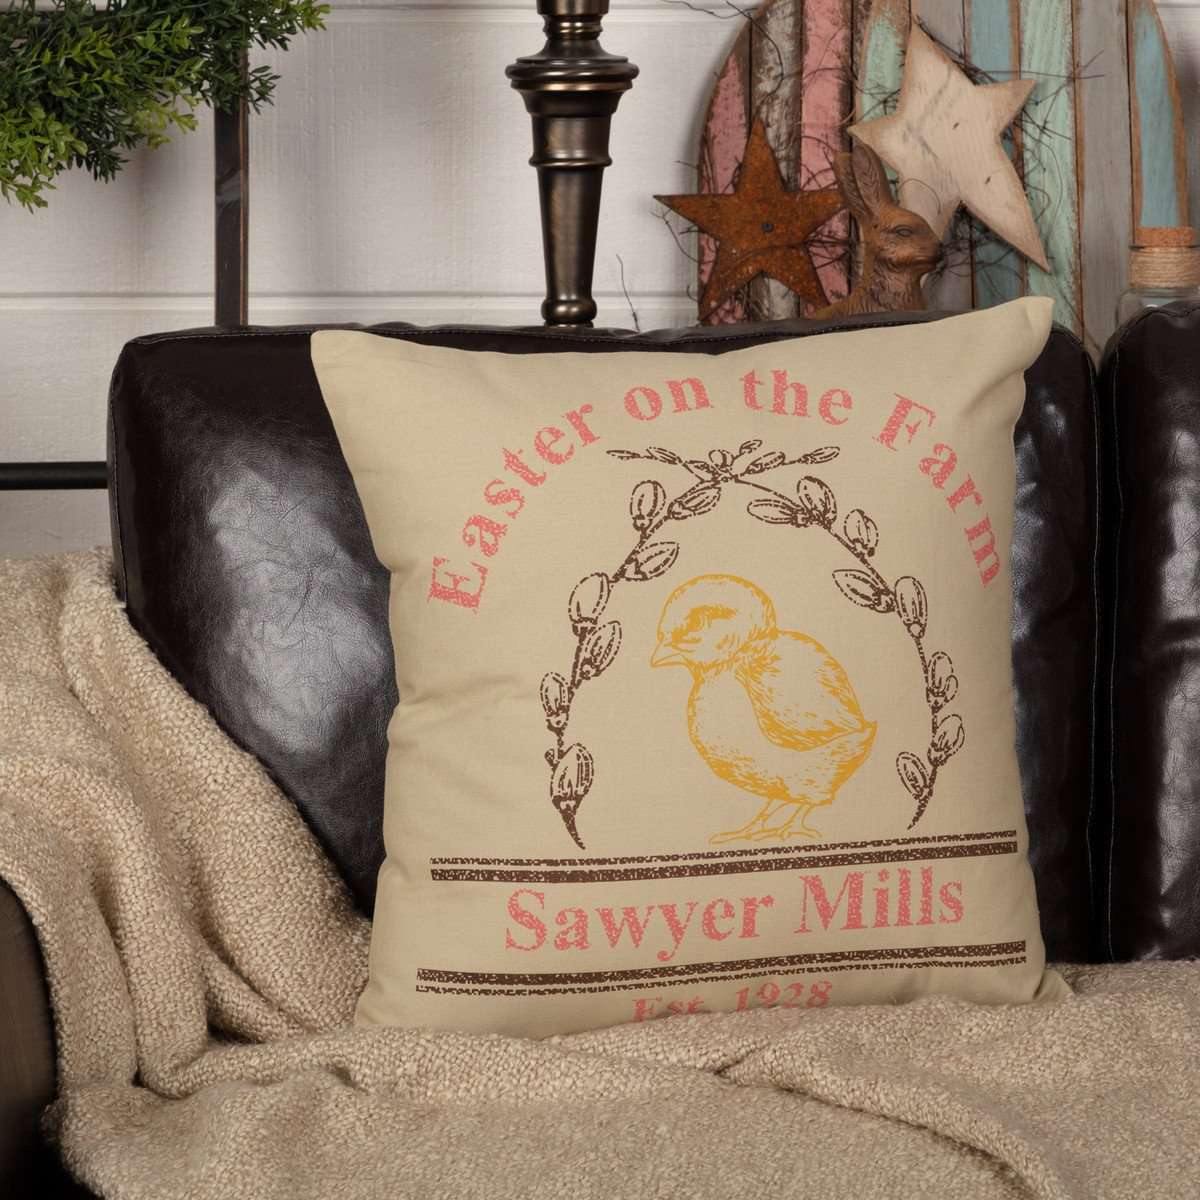 Sawyer Mill Easter on the Farm Chick Pillow 18x18 VHC Brands